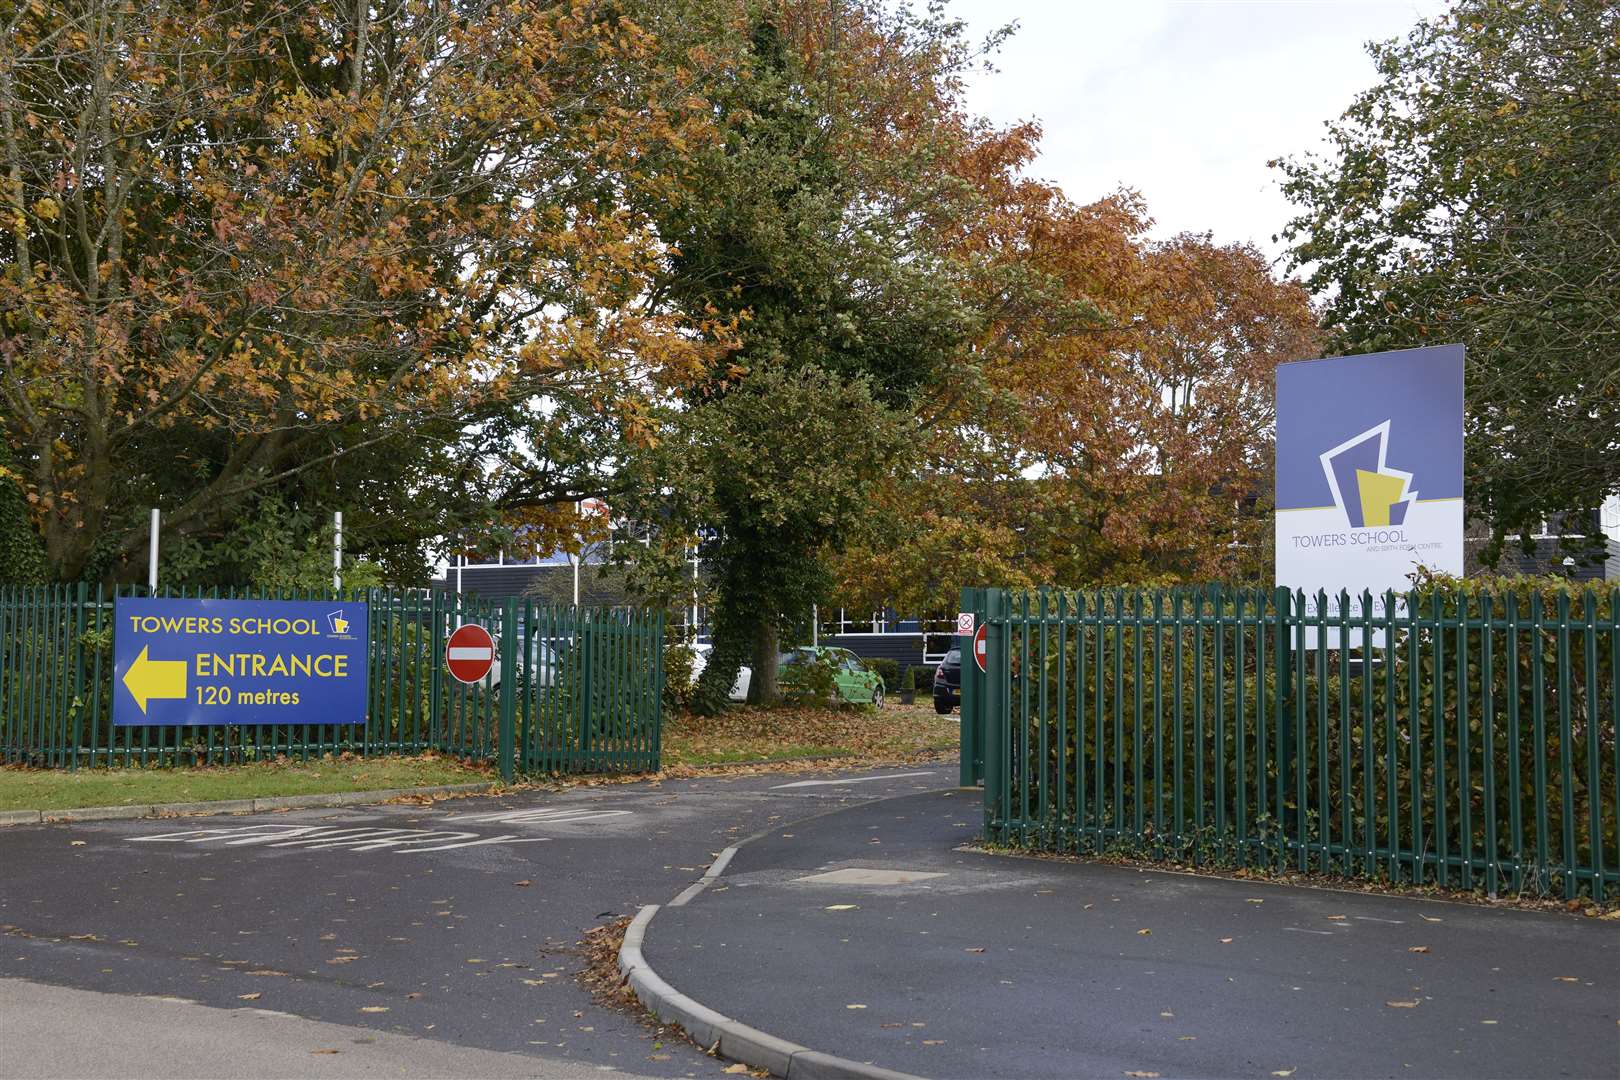 Towers School was last rated 'good' in 2008